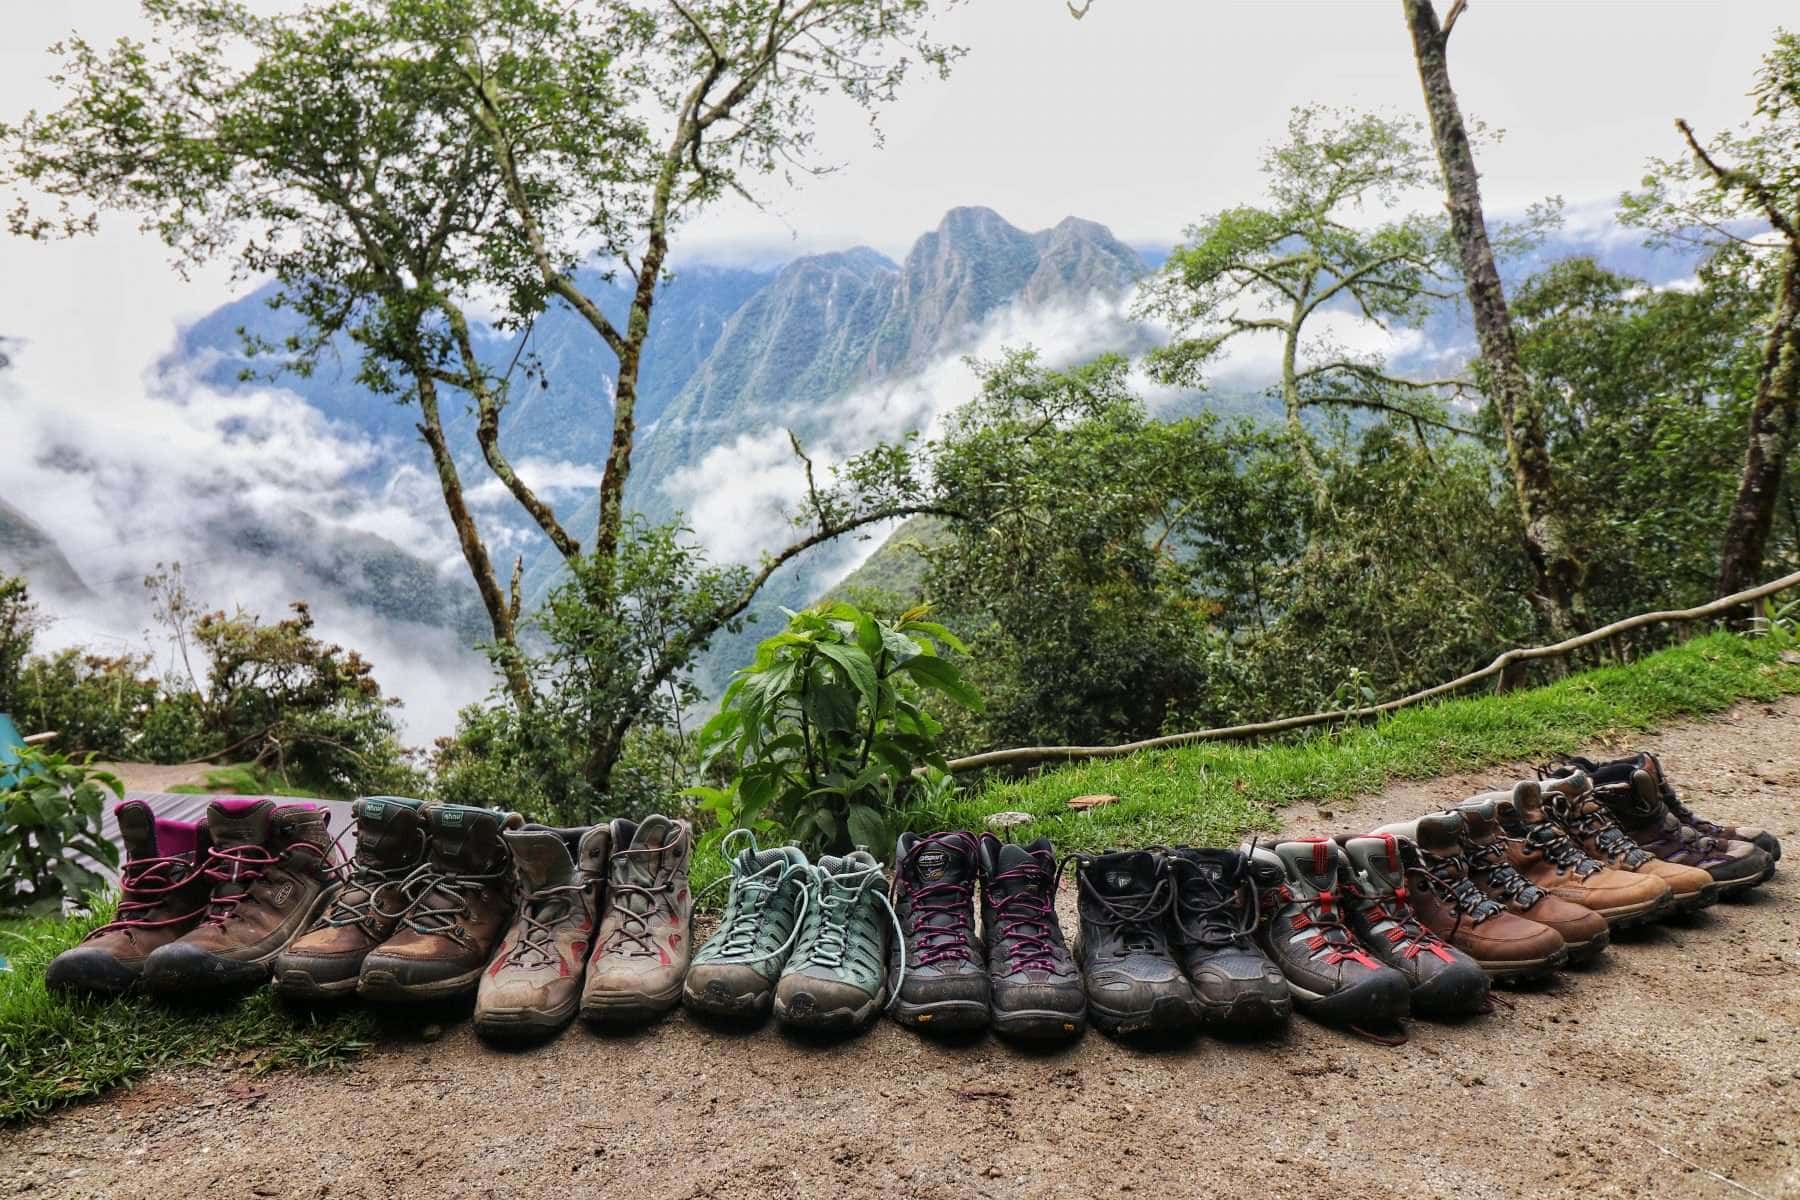 Hiking boots lined up along the Inca Trail with trees and mountains in the distance